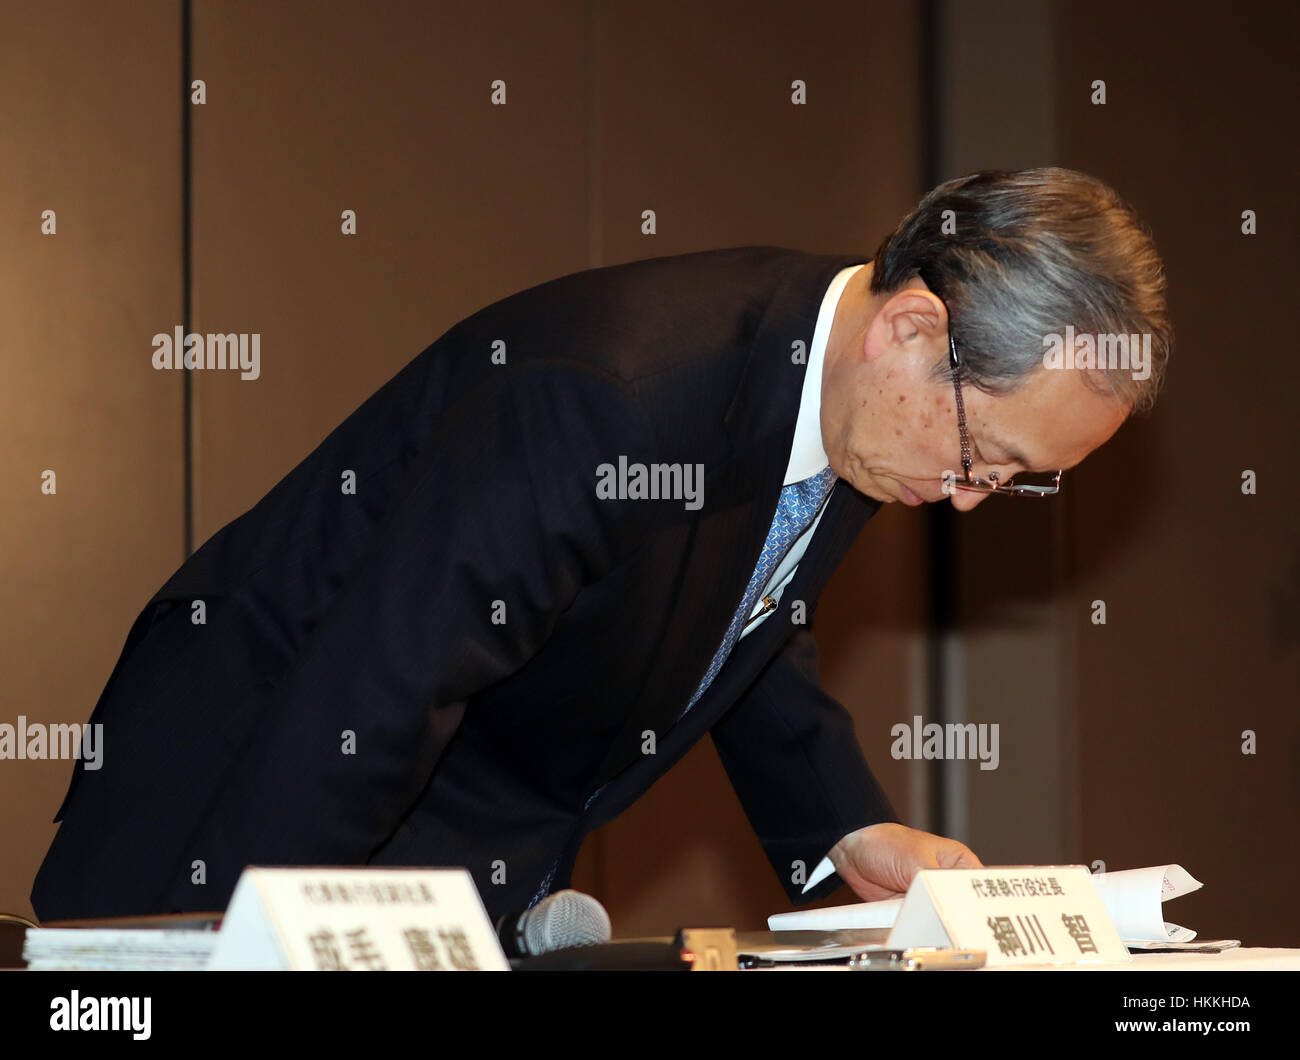 Tokyo, Japan. 27th Dec, 2016. Japan's troubled electronics giant Toshiba president Satoshi Tsunakawa bows his head as he speaks before press at the company's headquarters in Tokyo on Friday, January 27, 2017. Toshiba will spin off its semiconductor business to raise funds as Toshiba's nuclear subsidiary Westinghouse had a massive loss in the US business. Credit: Yoshio Tsunoda/AFLO/Alamy Live News Stock Photo